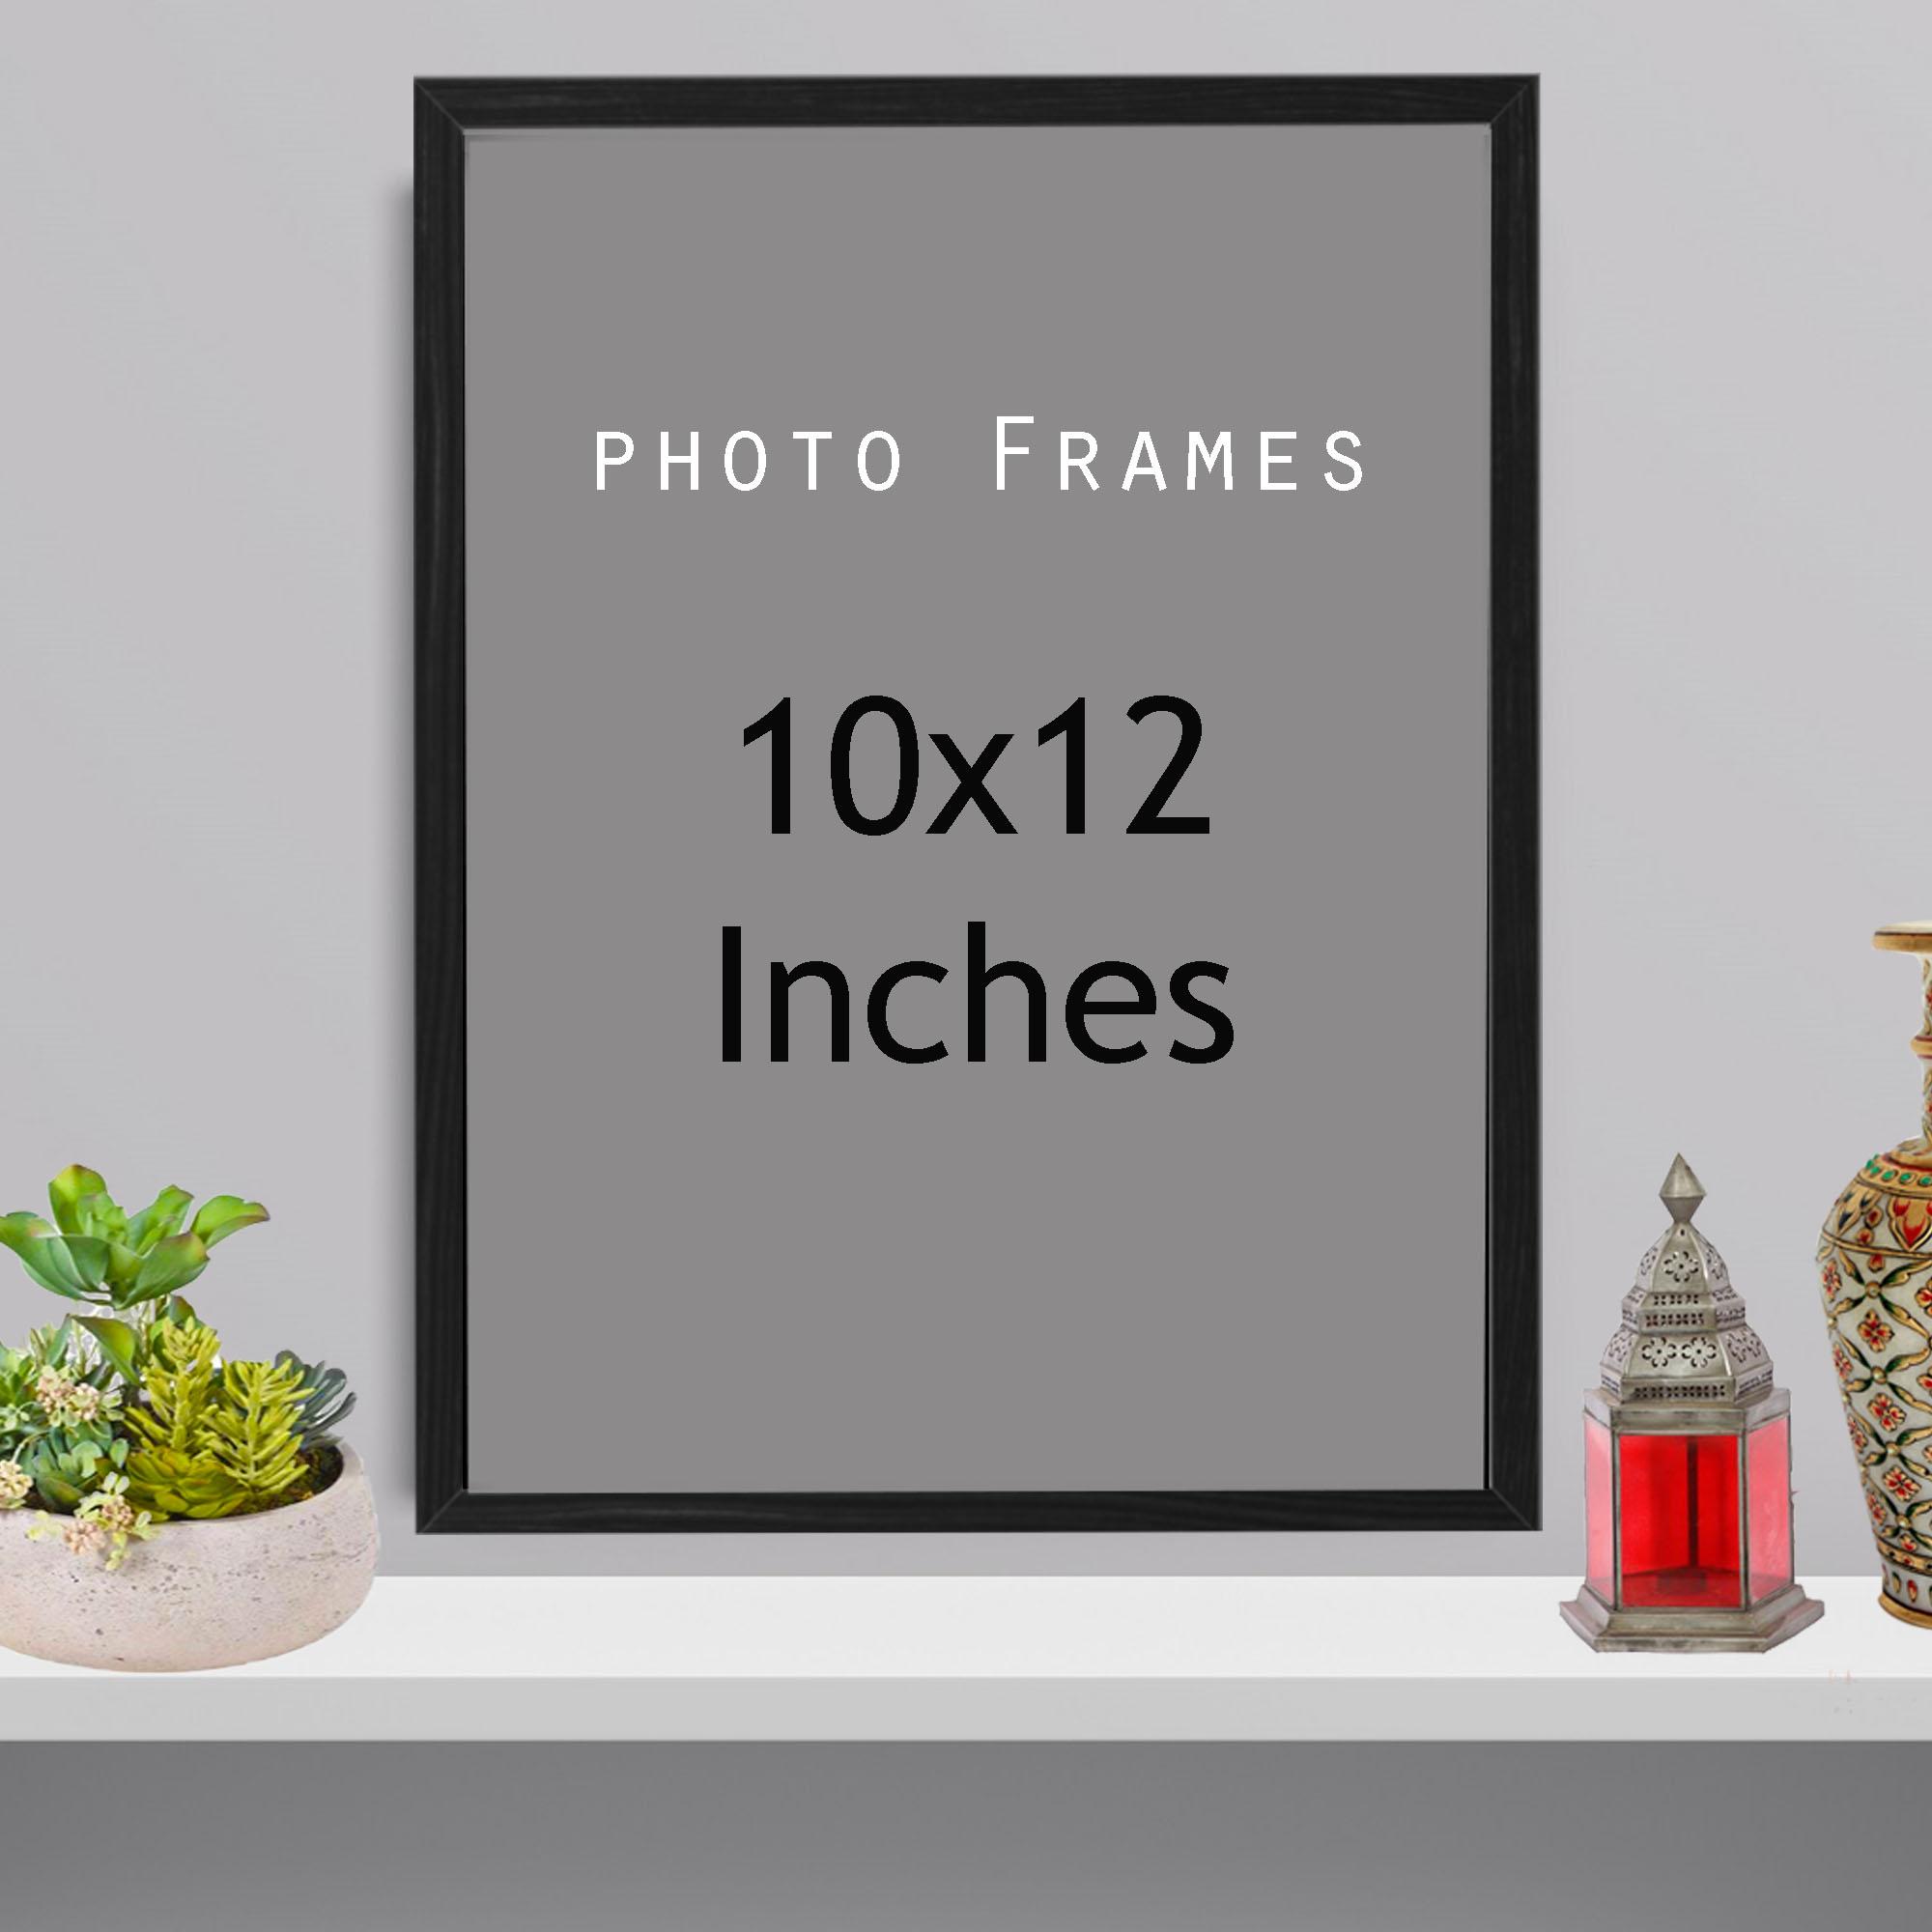 A4 Photo Frame Size In Inches | damnxgood.com